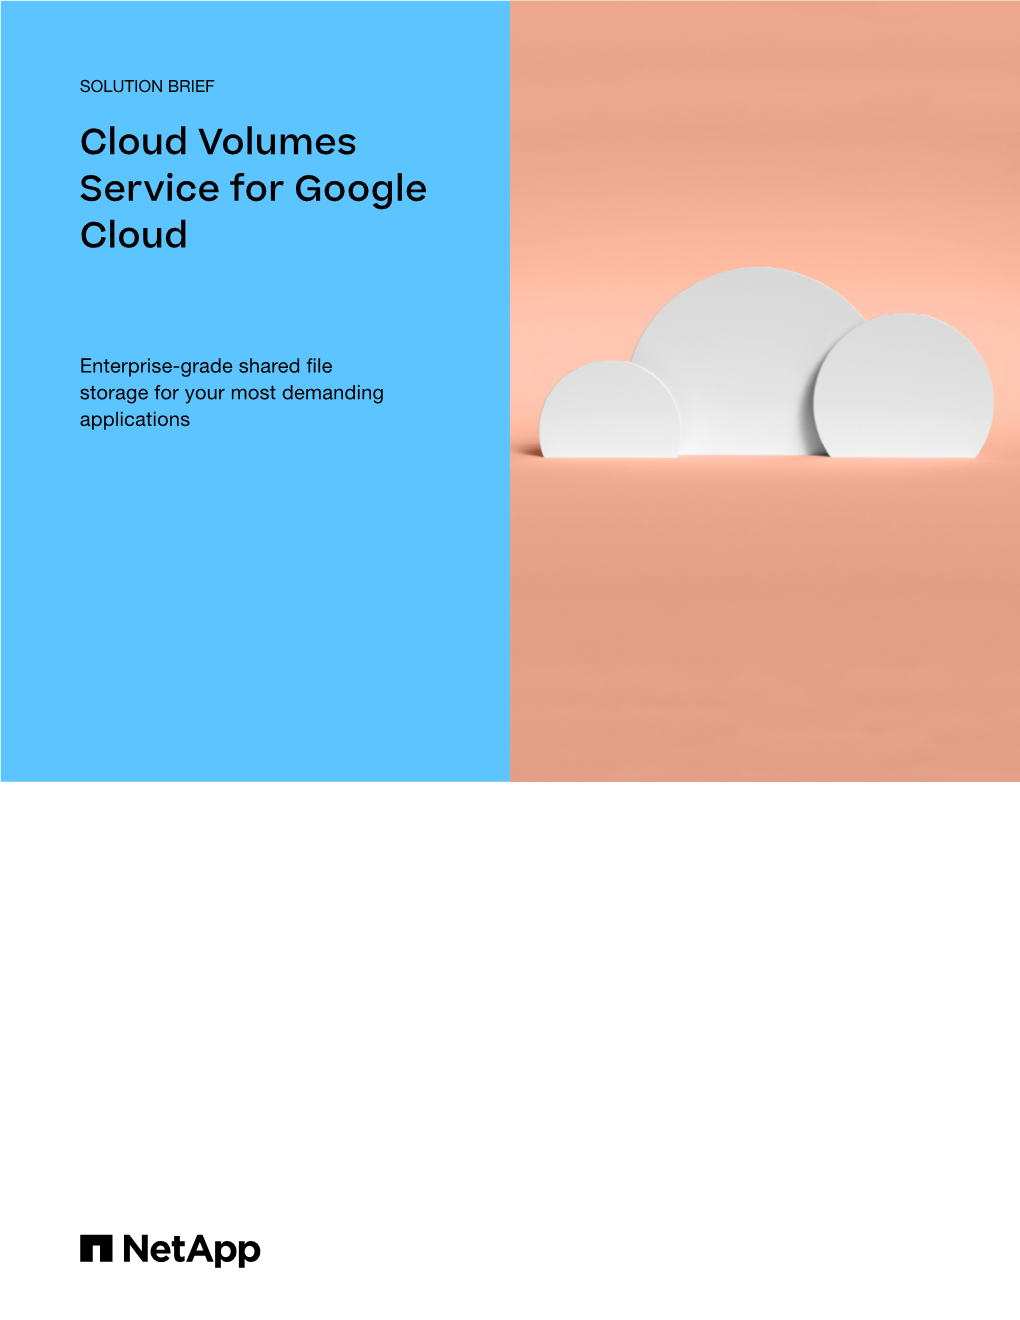 SOLUTION BRIEF Cloud Volumes Service for Google Cloud